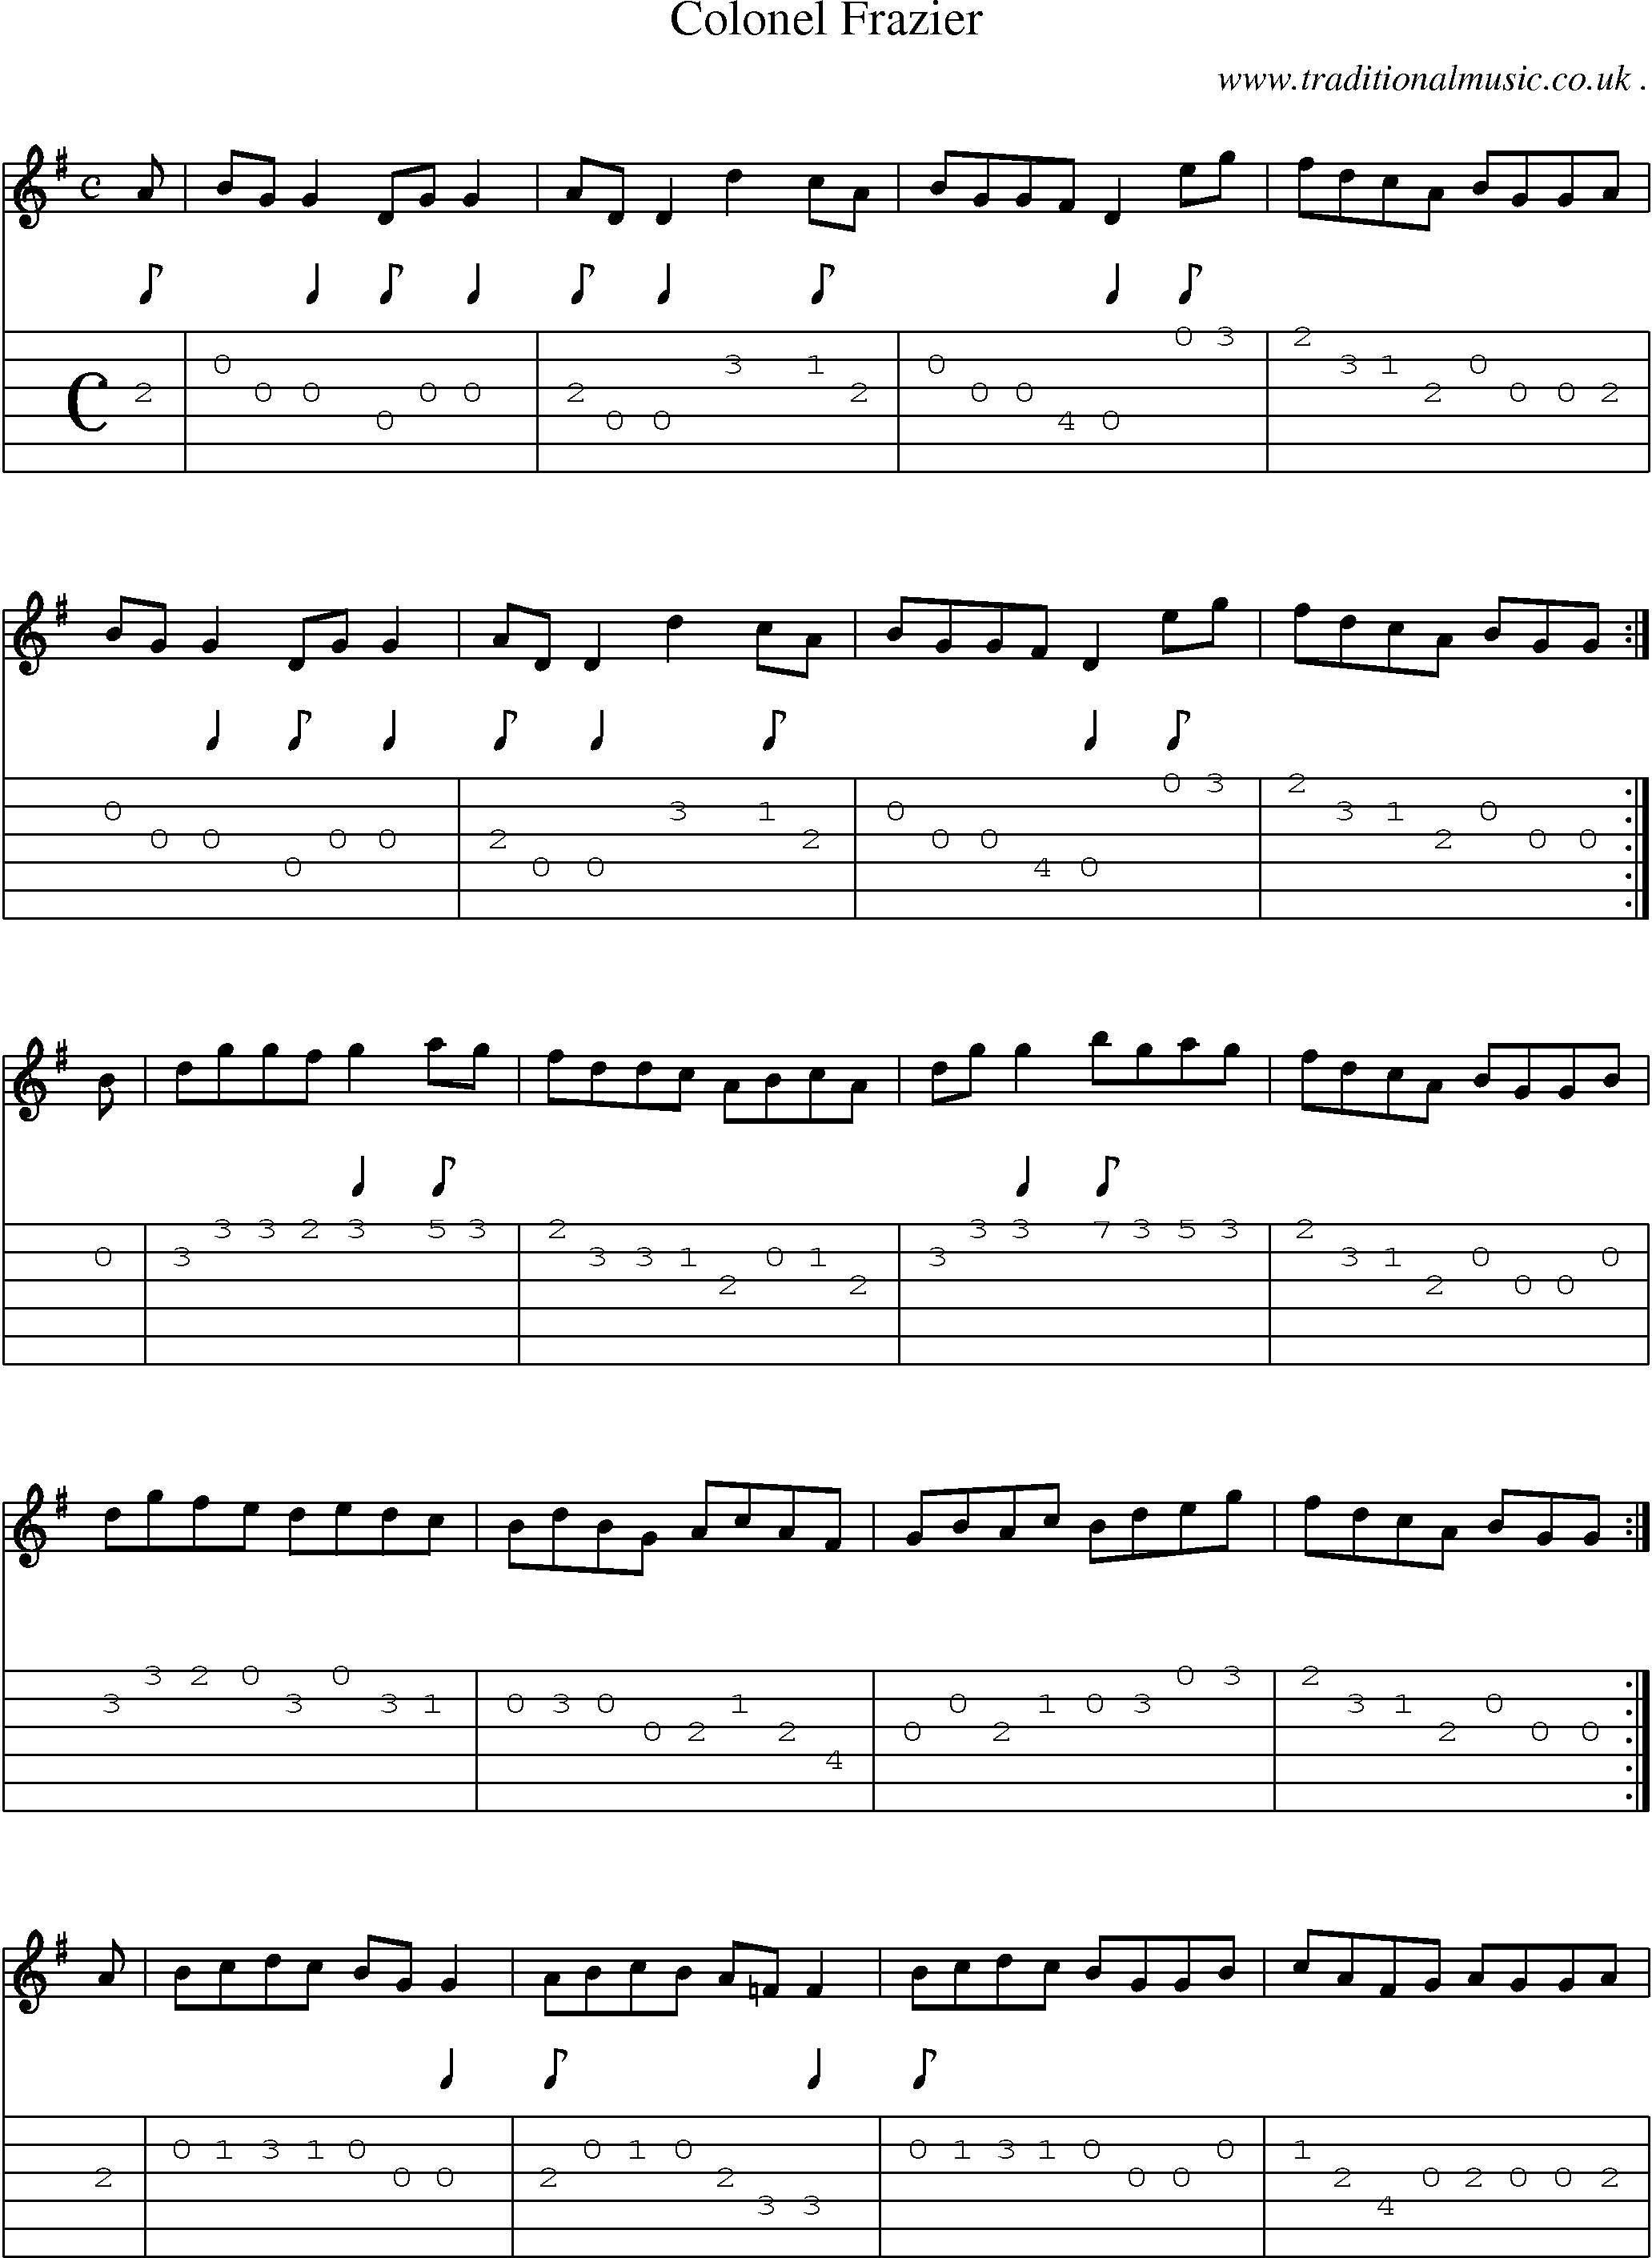 Sheet-Music and Guitar Tabs for Colonel Frazier